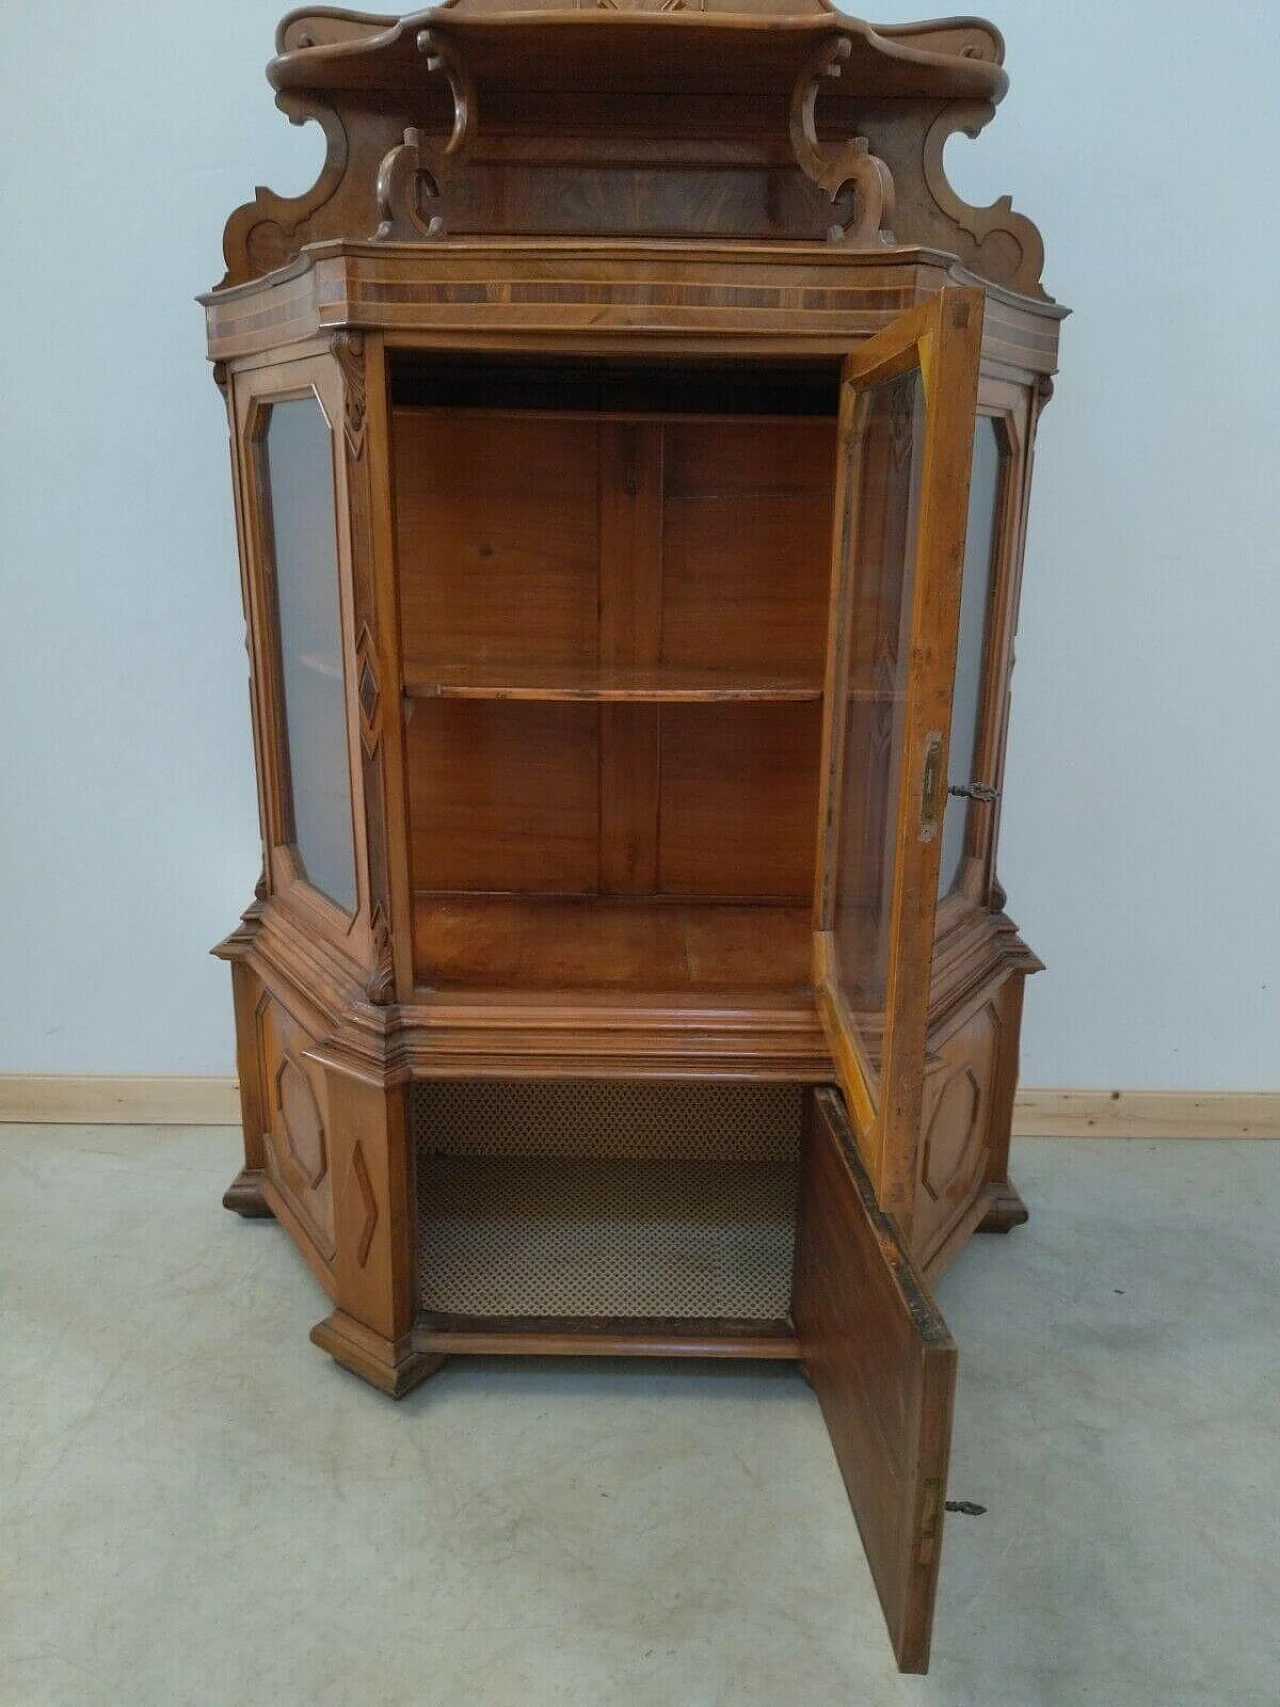 Two-part display case in walnut, spruce and glass, 19th century 1477119